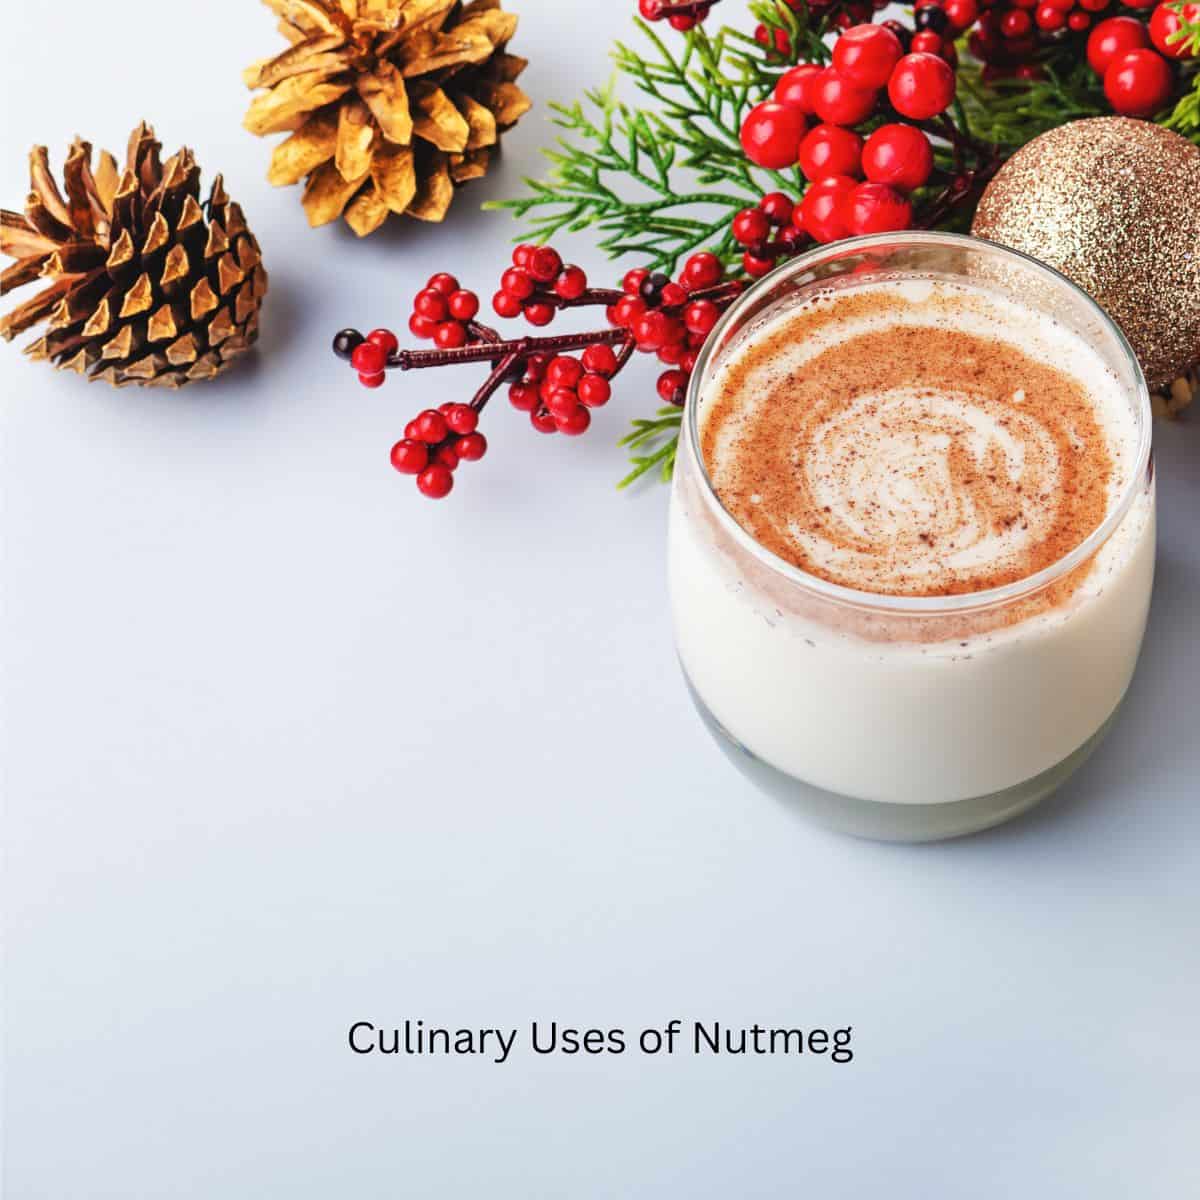 A glass of eggnog with nutmeg sprinkled on top, surrounded by festive holiday decorations.